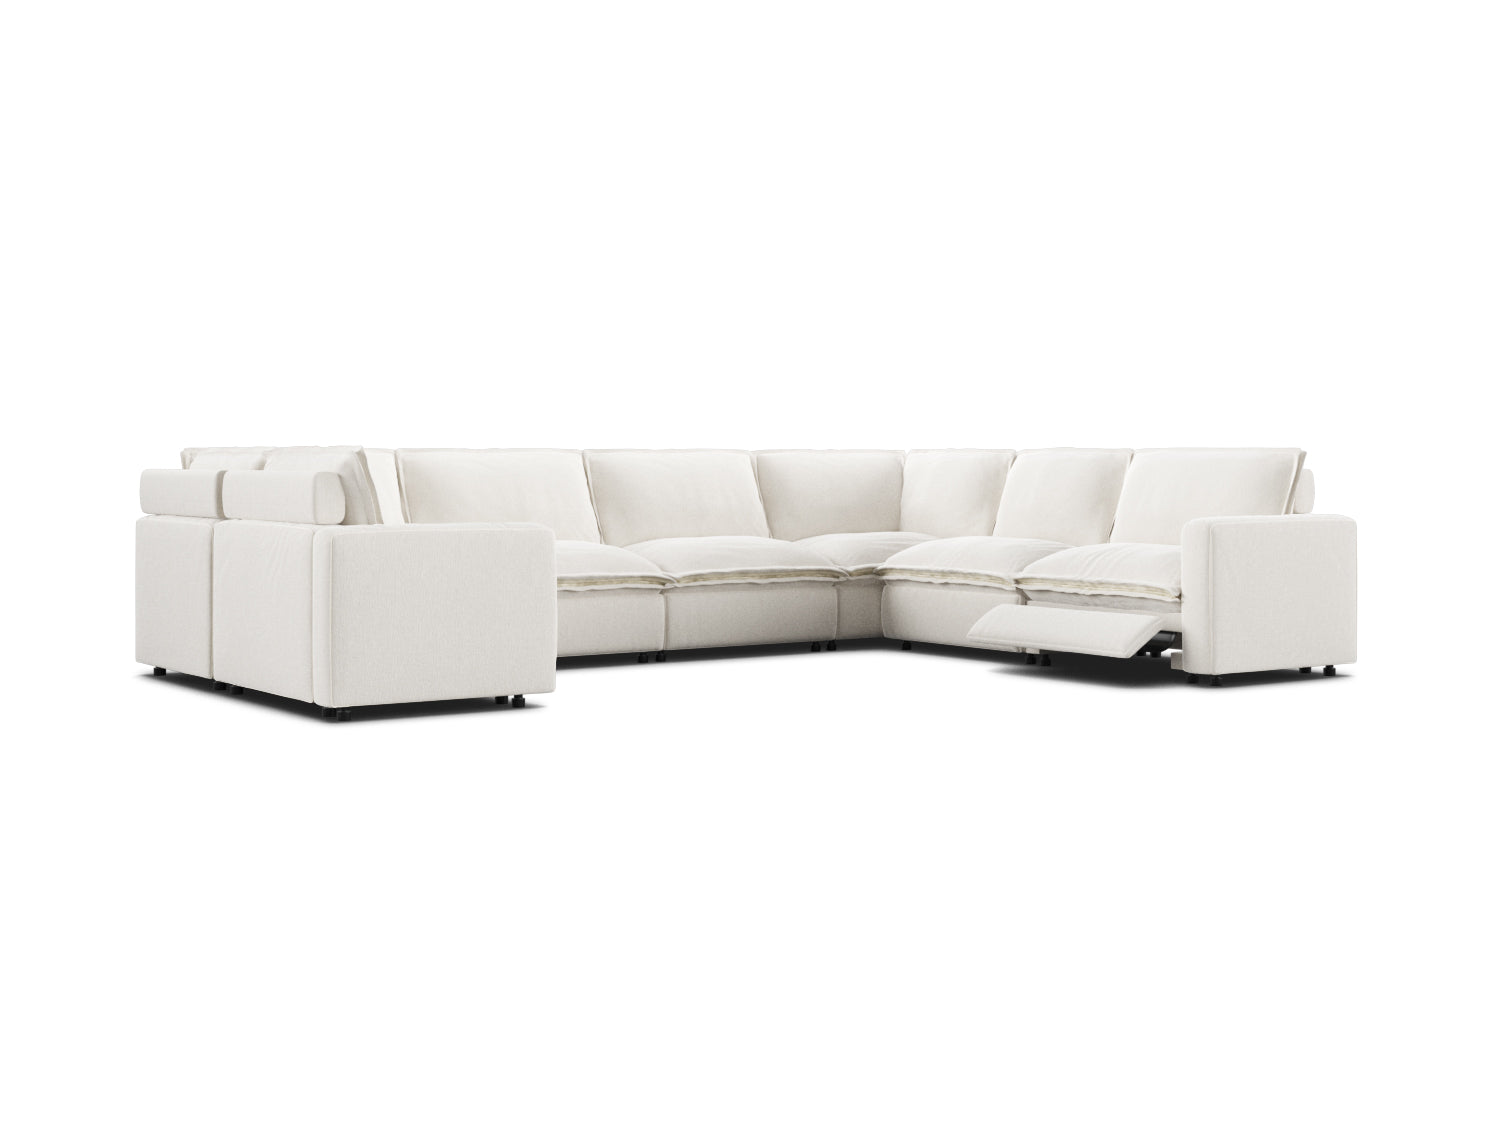 Reclining 7 seat sectional couch in white linen, modular